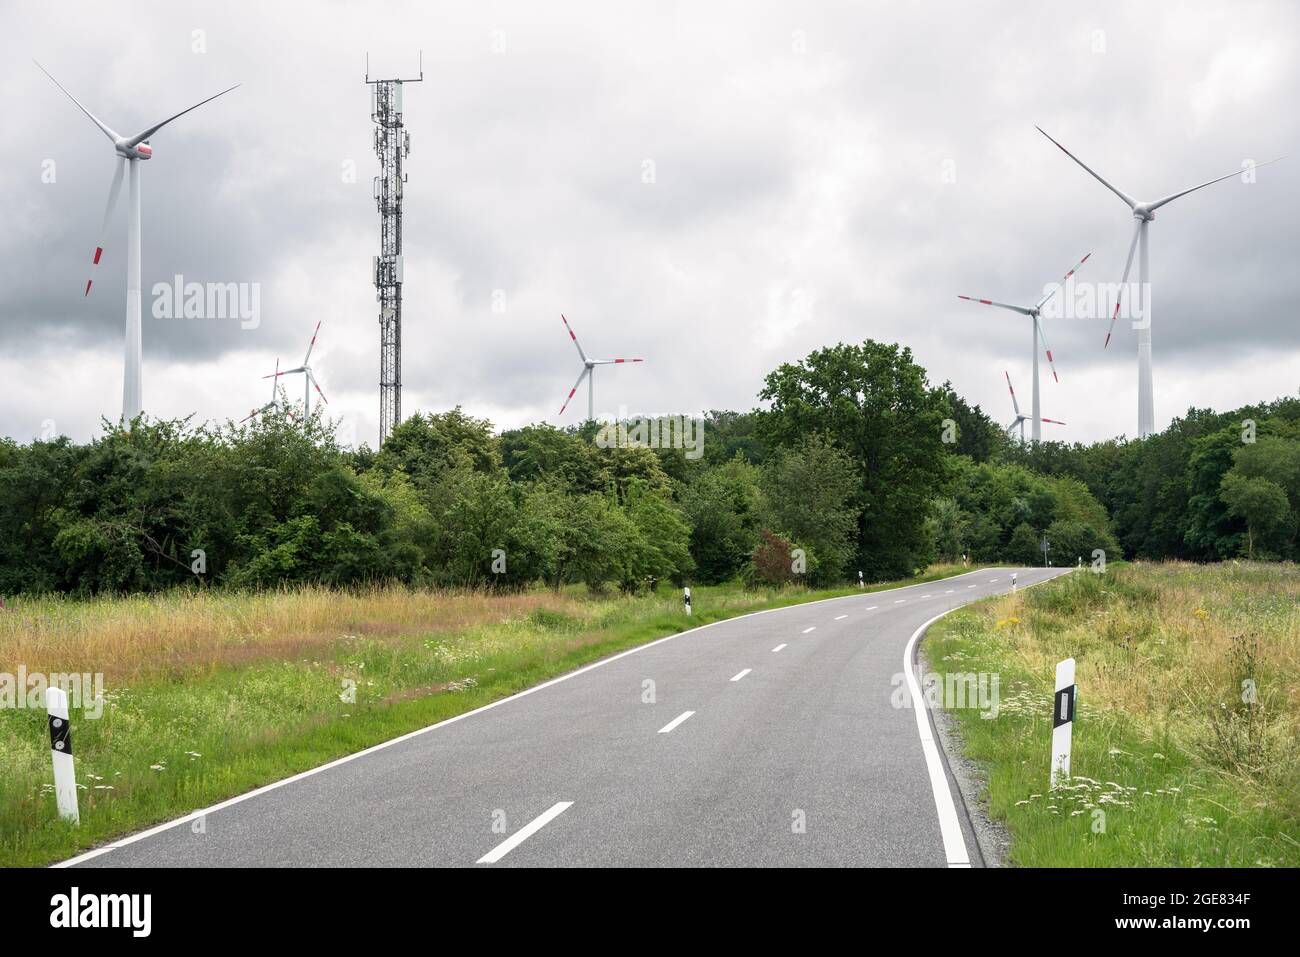 Deserted country road running through a wind farm on a cloudy summer day Stock Photo